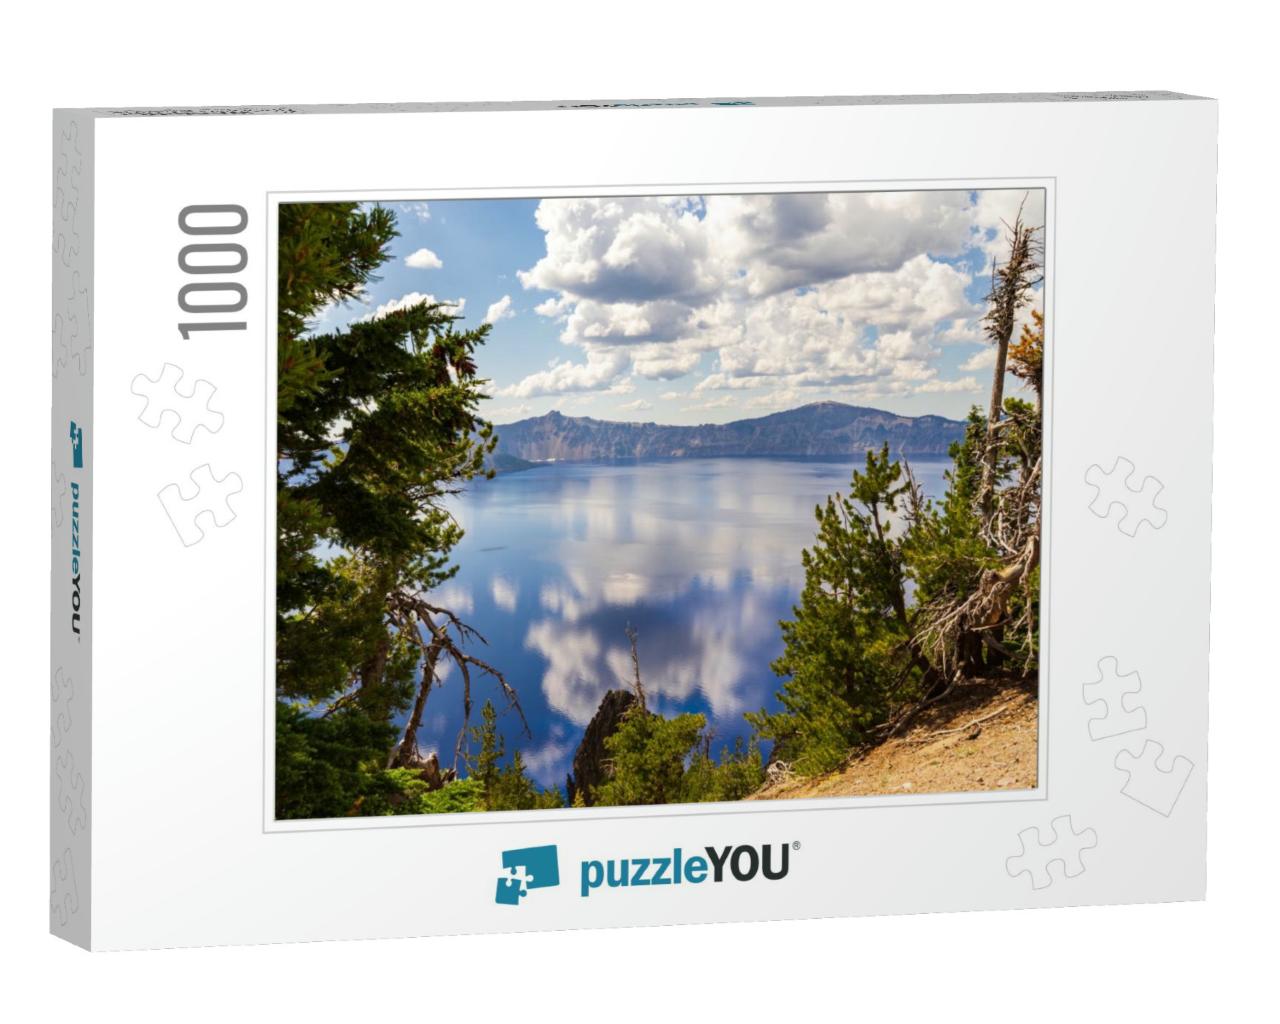 Crater Lake National Park Oregon Usa, Lake with Cloud Ref... Jigsaw Puzzle with 1000 pieces